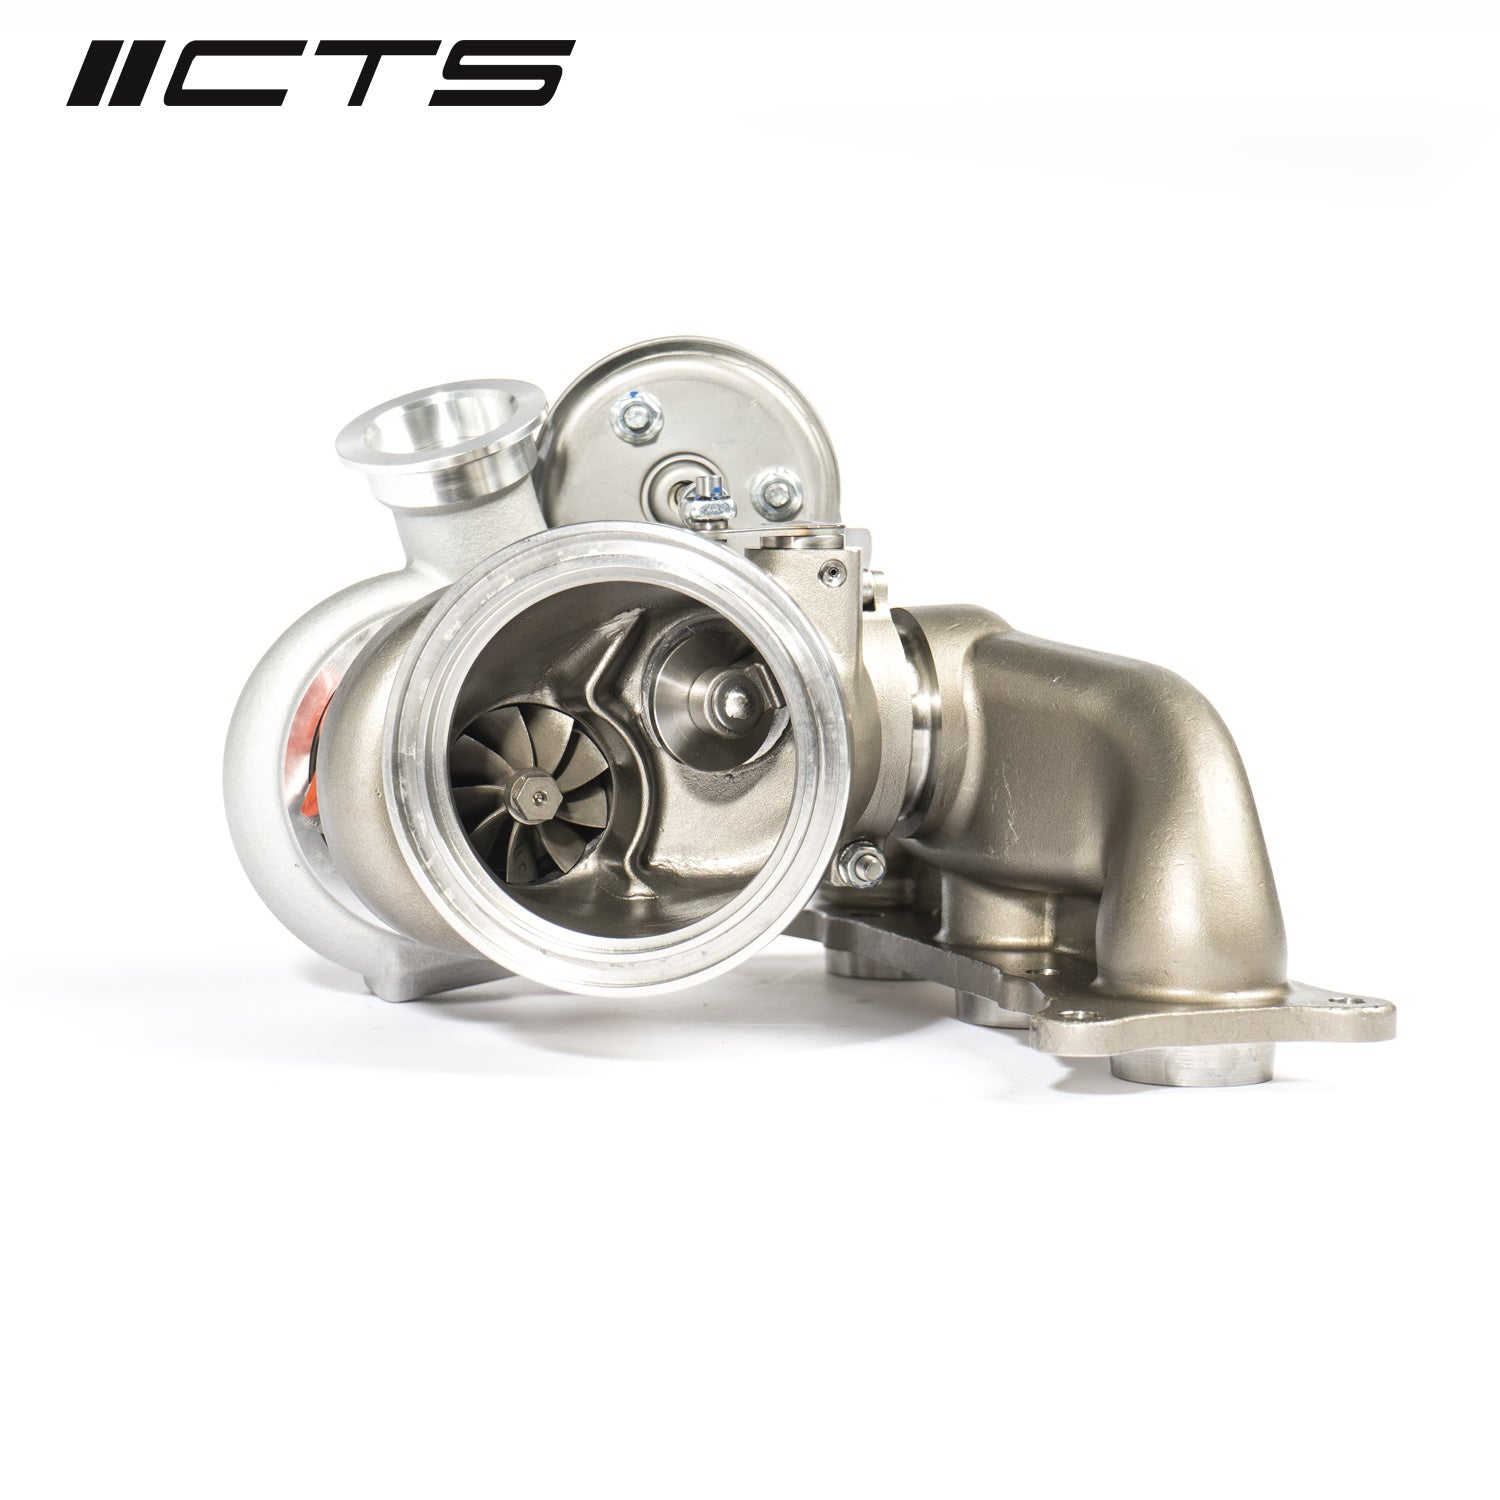 CTS TURBO BMW N54 335I/335XI/335IS STAGE 2+ “RS” TURBO UPGRADE - 0